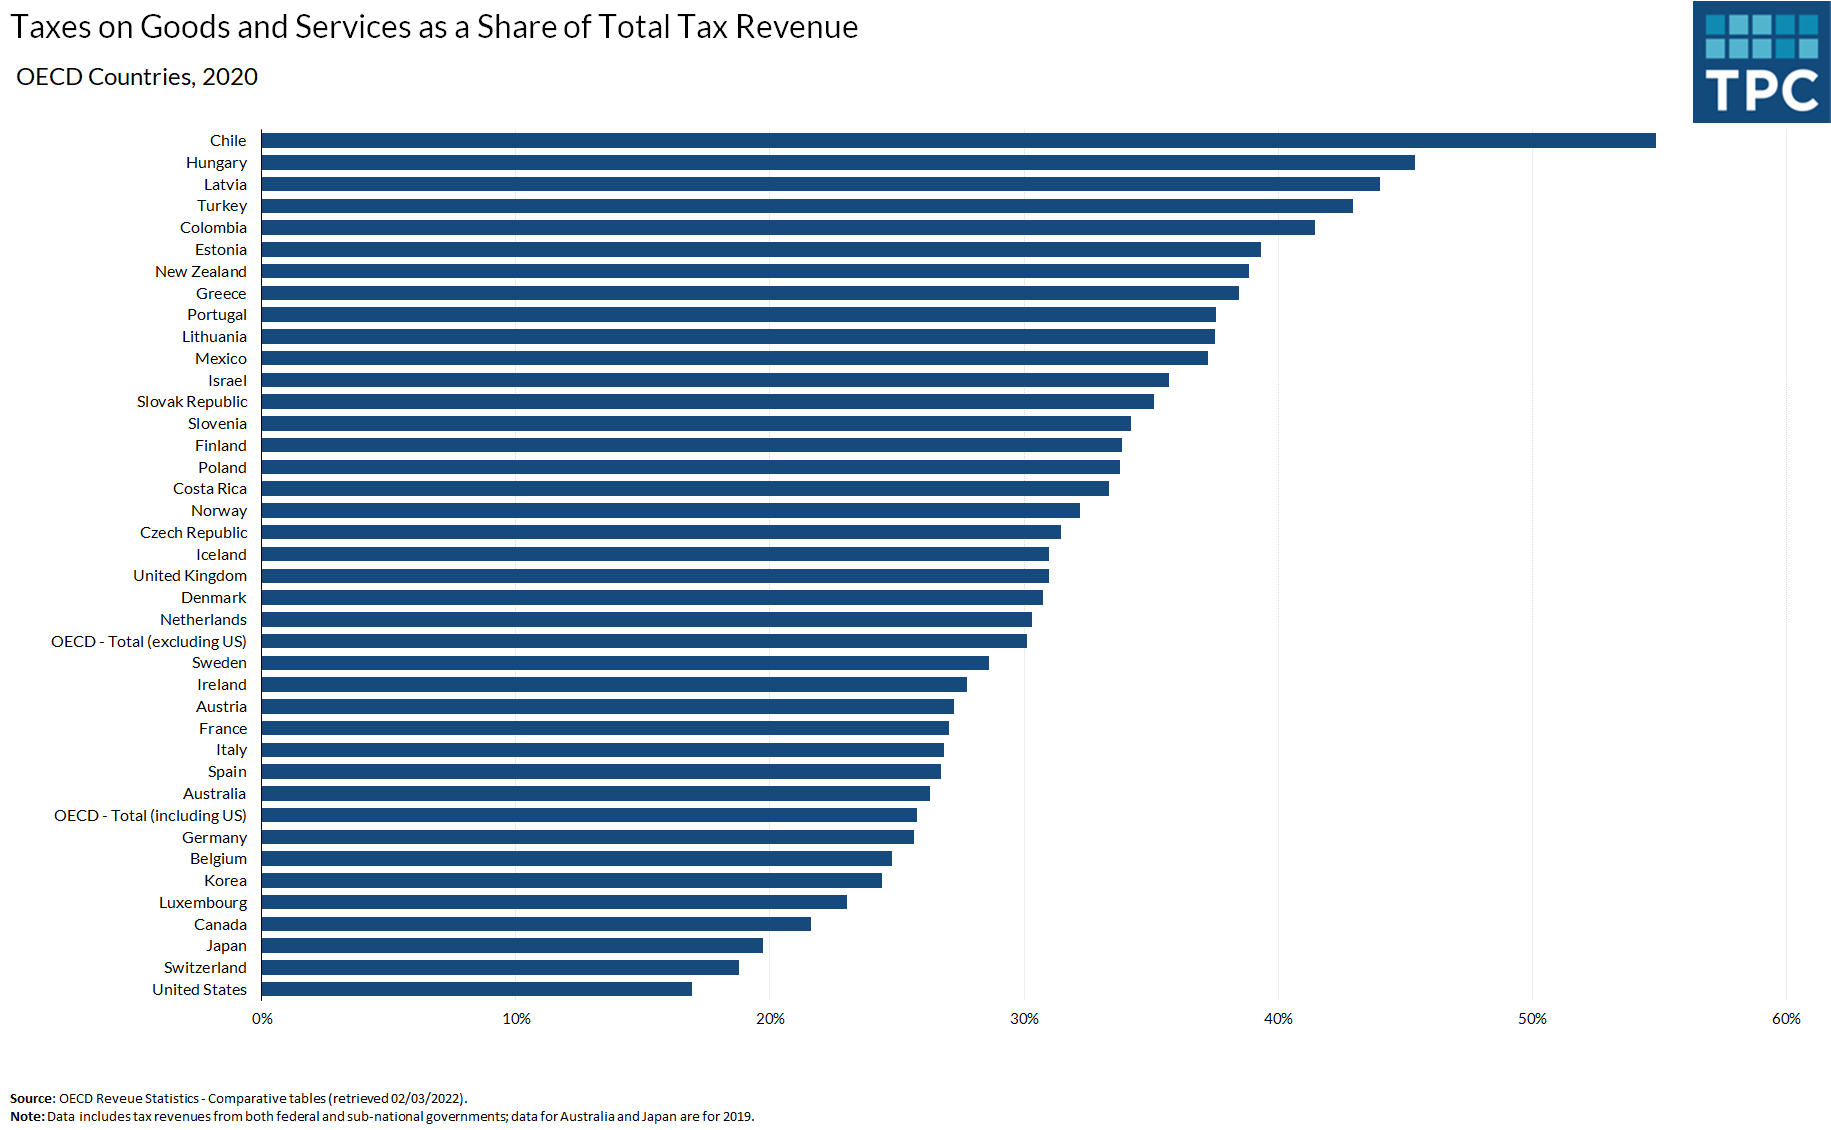 In 2020, among all OECD countries, share of total tax revenue from taxes on goods and services ranged from 17% in the U.S. to 55% in Chile. The U.S. does not have a federal value-added tax, unlike most OECD countries.